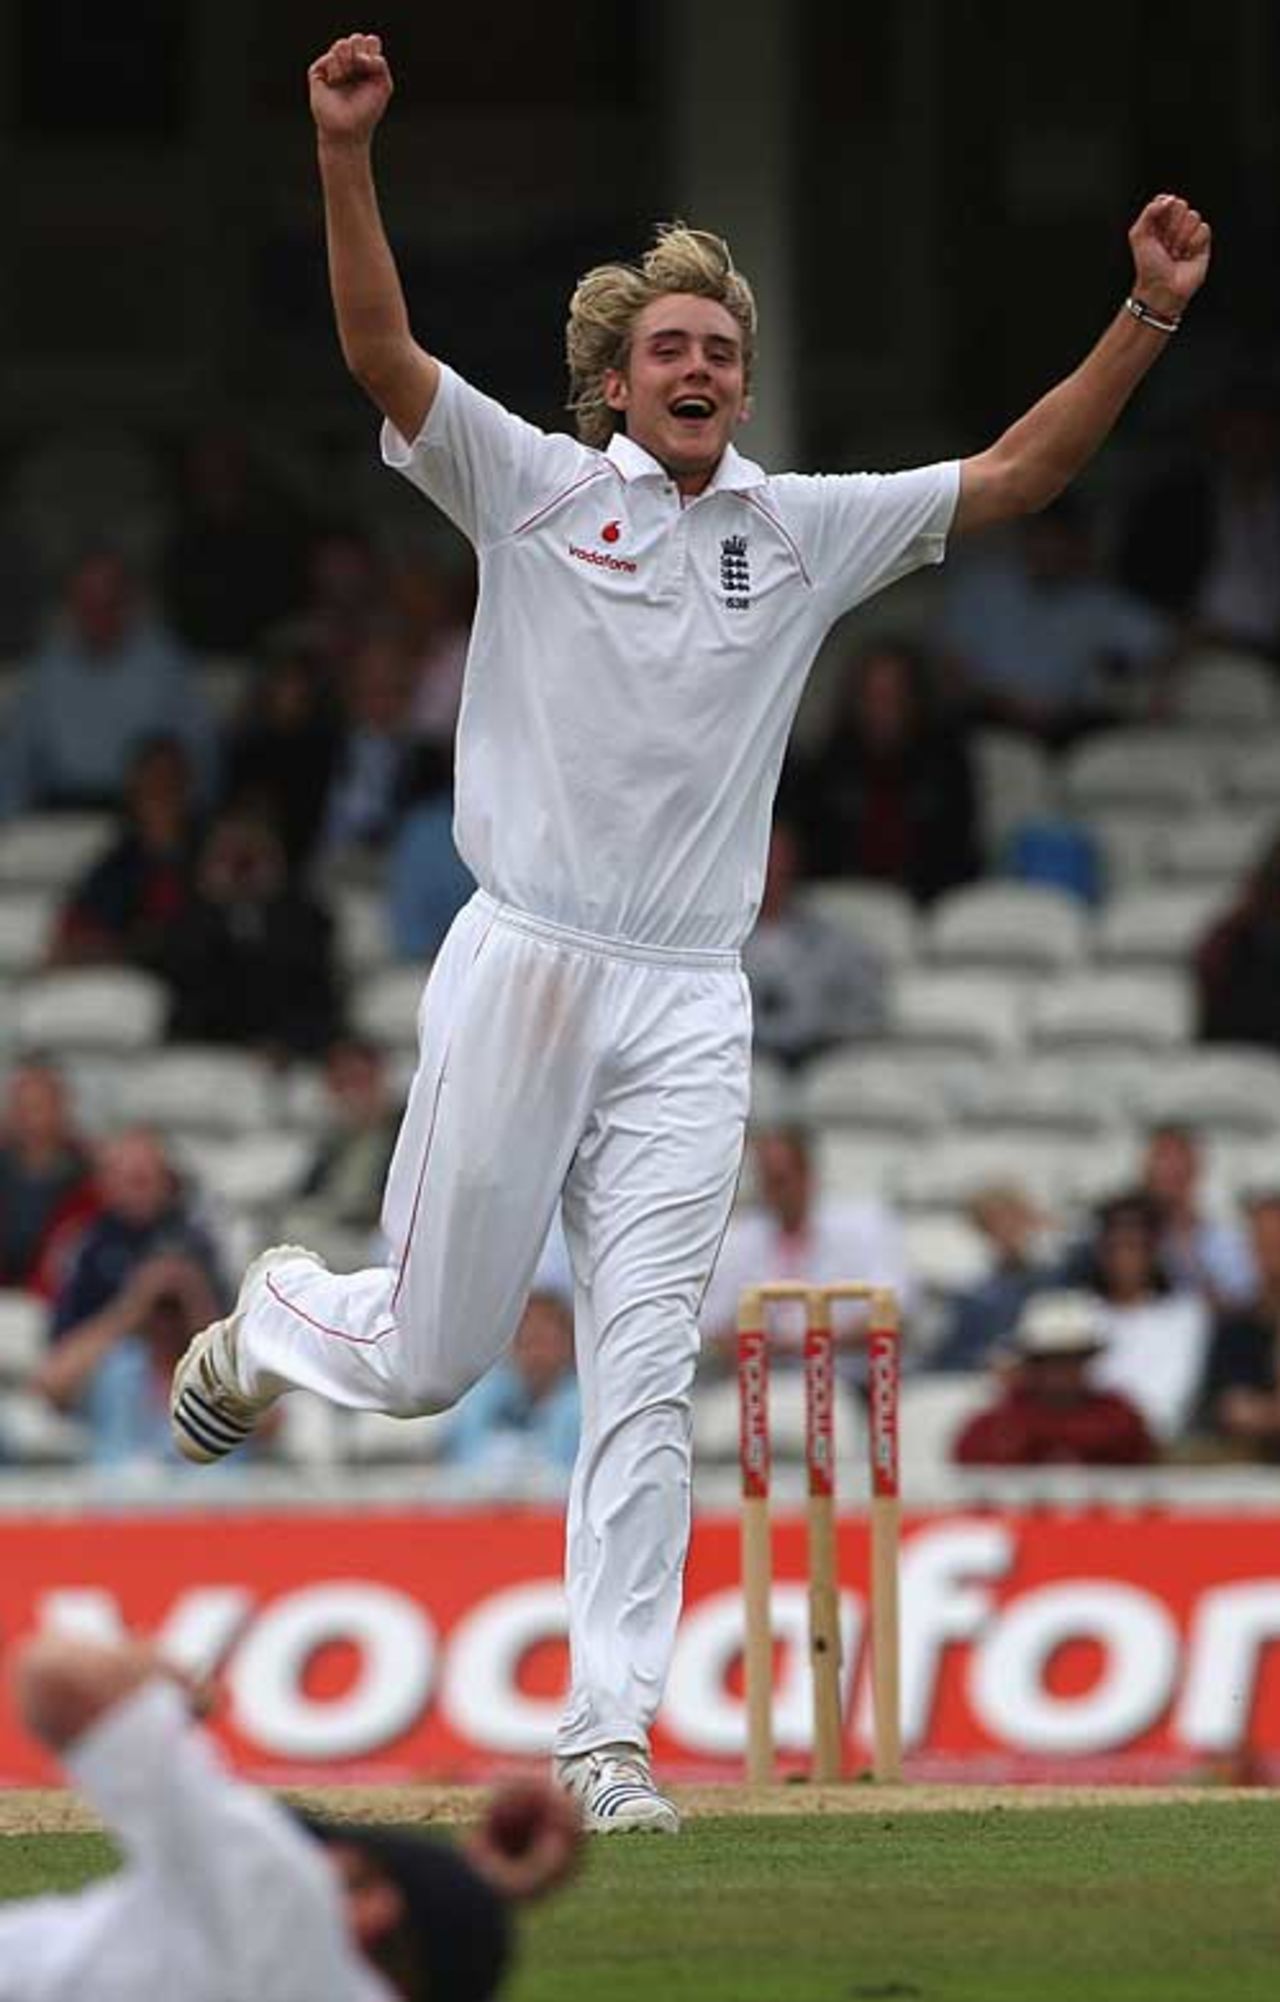 Stuart Broad helped wrap up stubborn South Africa resistance, England v South Africa, 4th Test, The Oval, August 10, 2008